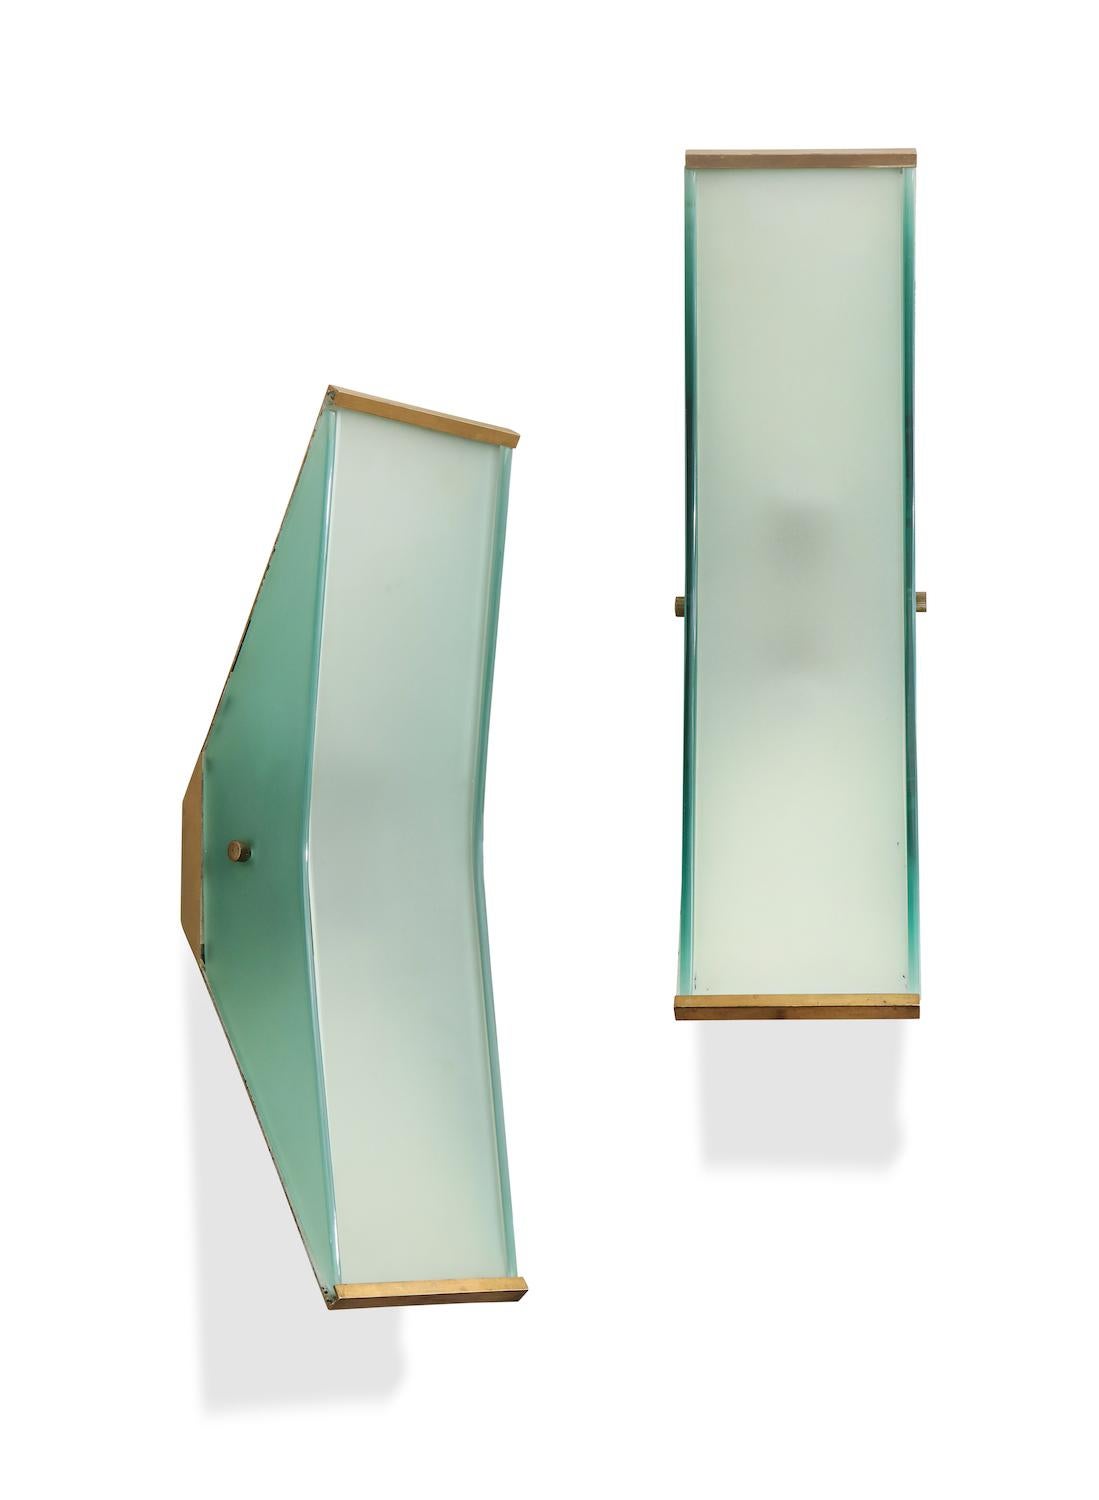 Rare wall sconces #2135 by Max Ingrand for Fontana Arte. Satin glass panels of natural and pale green colors. Polished brass structure. 2 candelabra sockets per sconce. Published: Fontana Arte 4, makers self-published catalog. Pg. 55. Provenance: